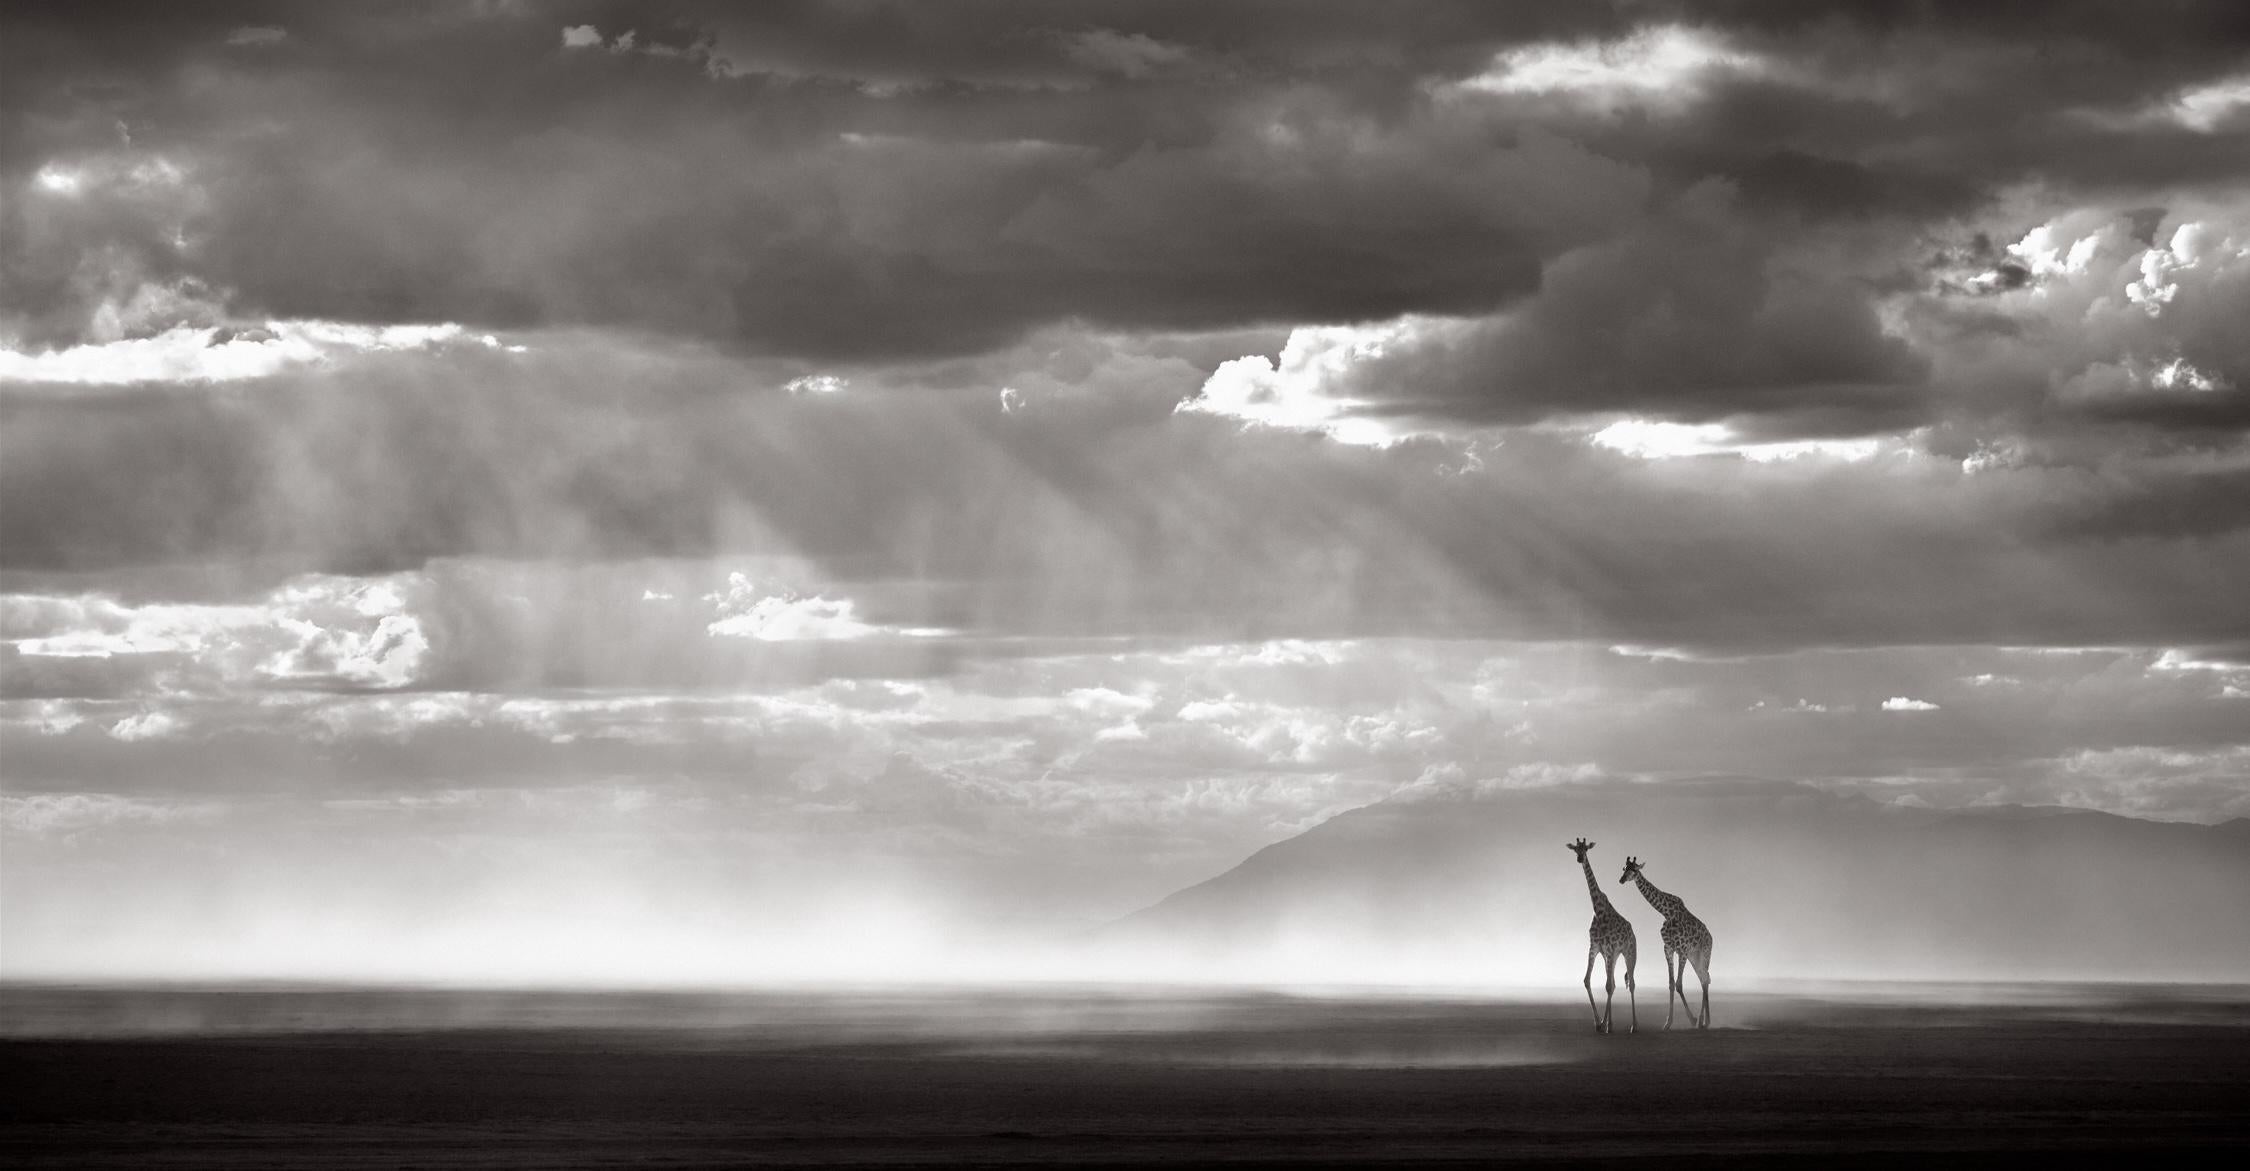 Drew Doggett Black and White Photograph - Giraffes walking across a dry lake bed in Amboseli with Kilimanjaro in backdrop 